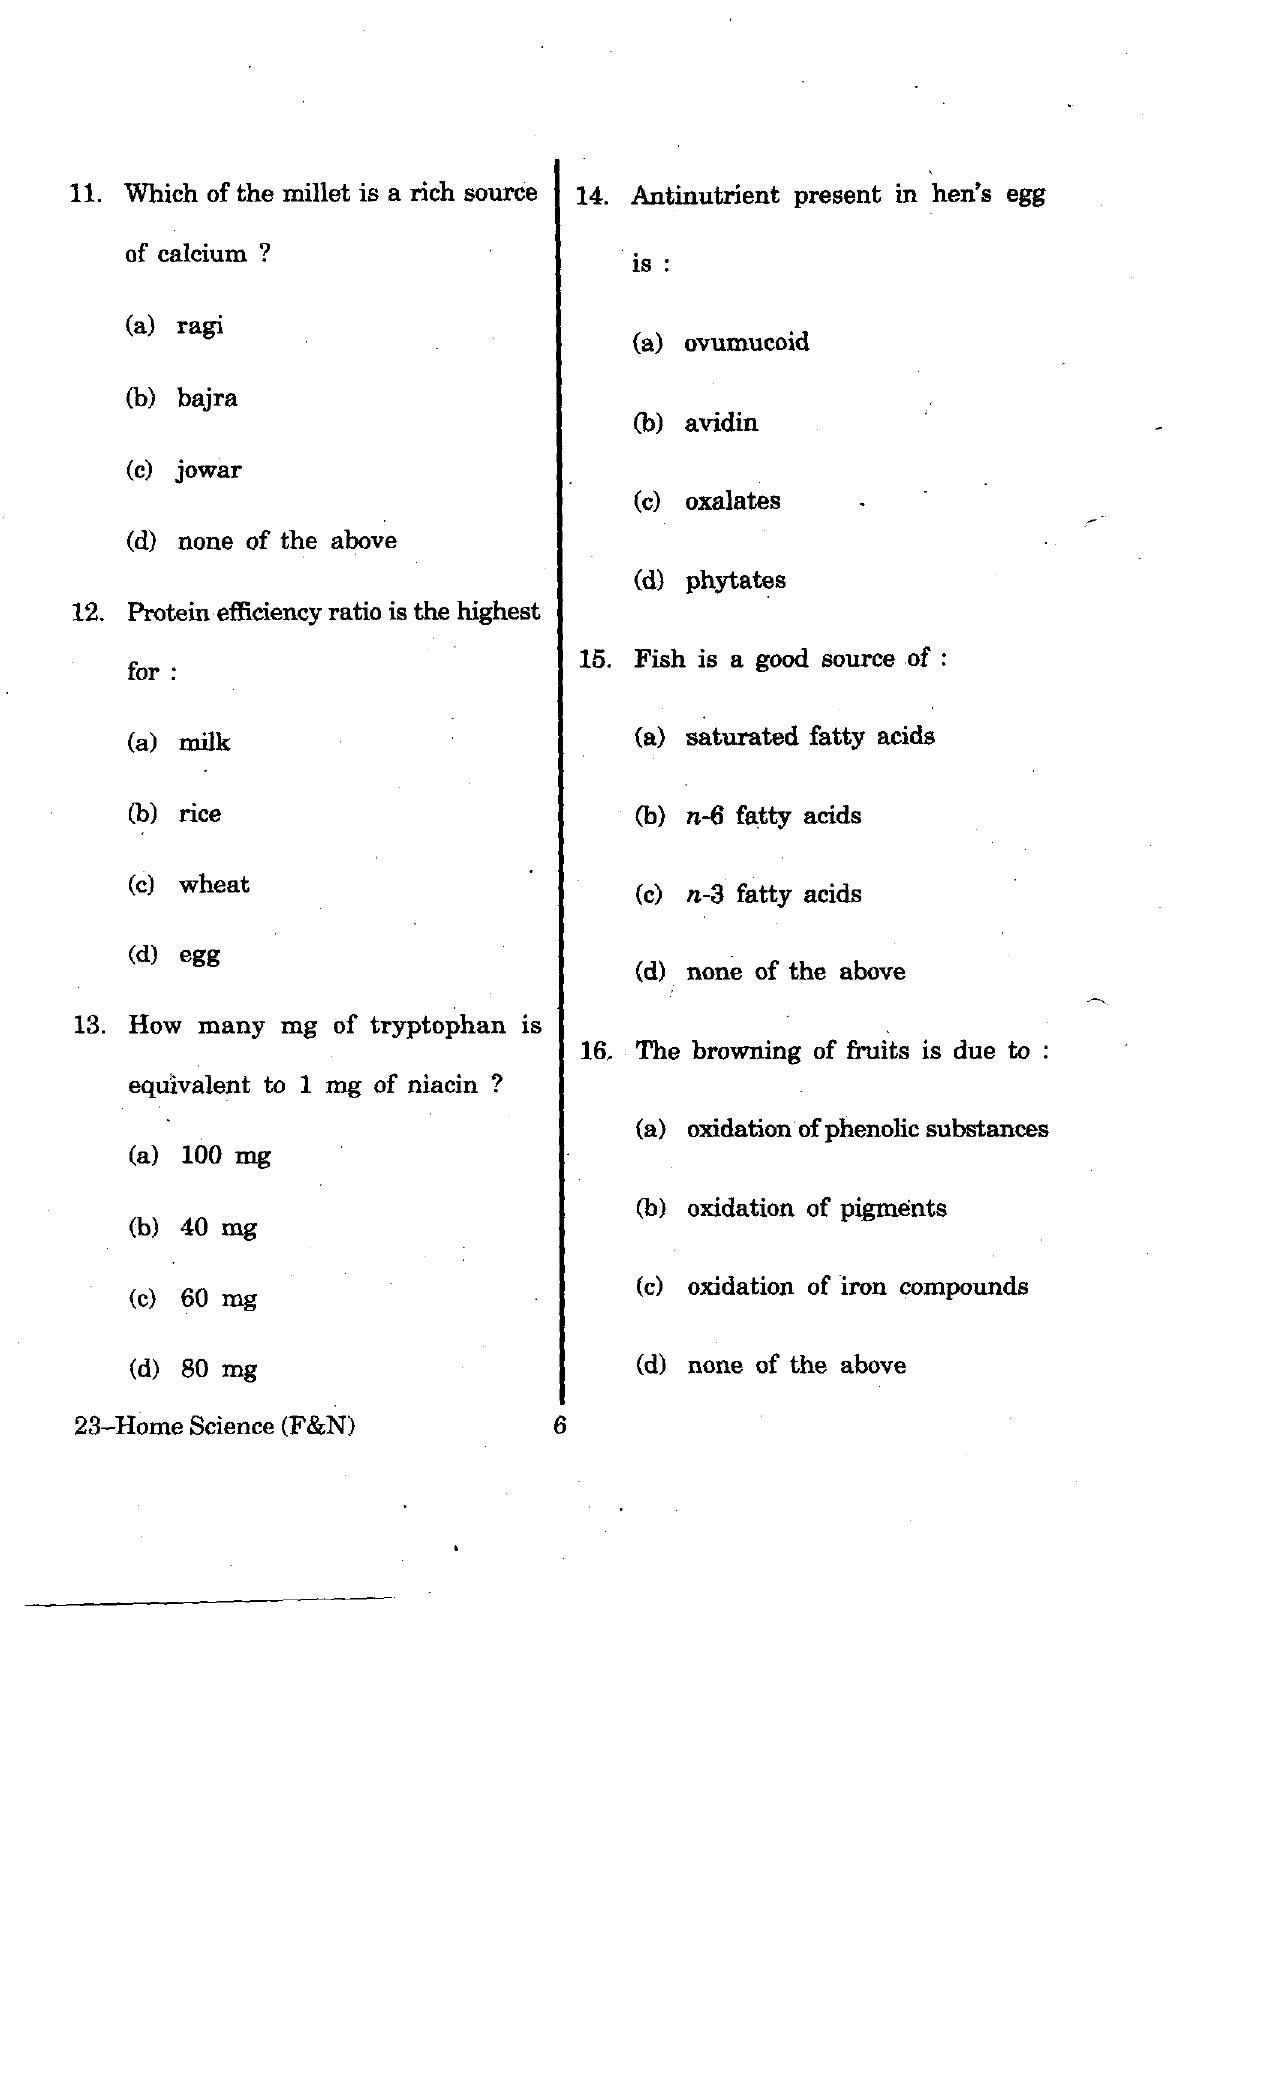 URATPG Home Science(Food & Nut.) 2012 Question Paper - Page 6